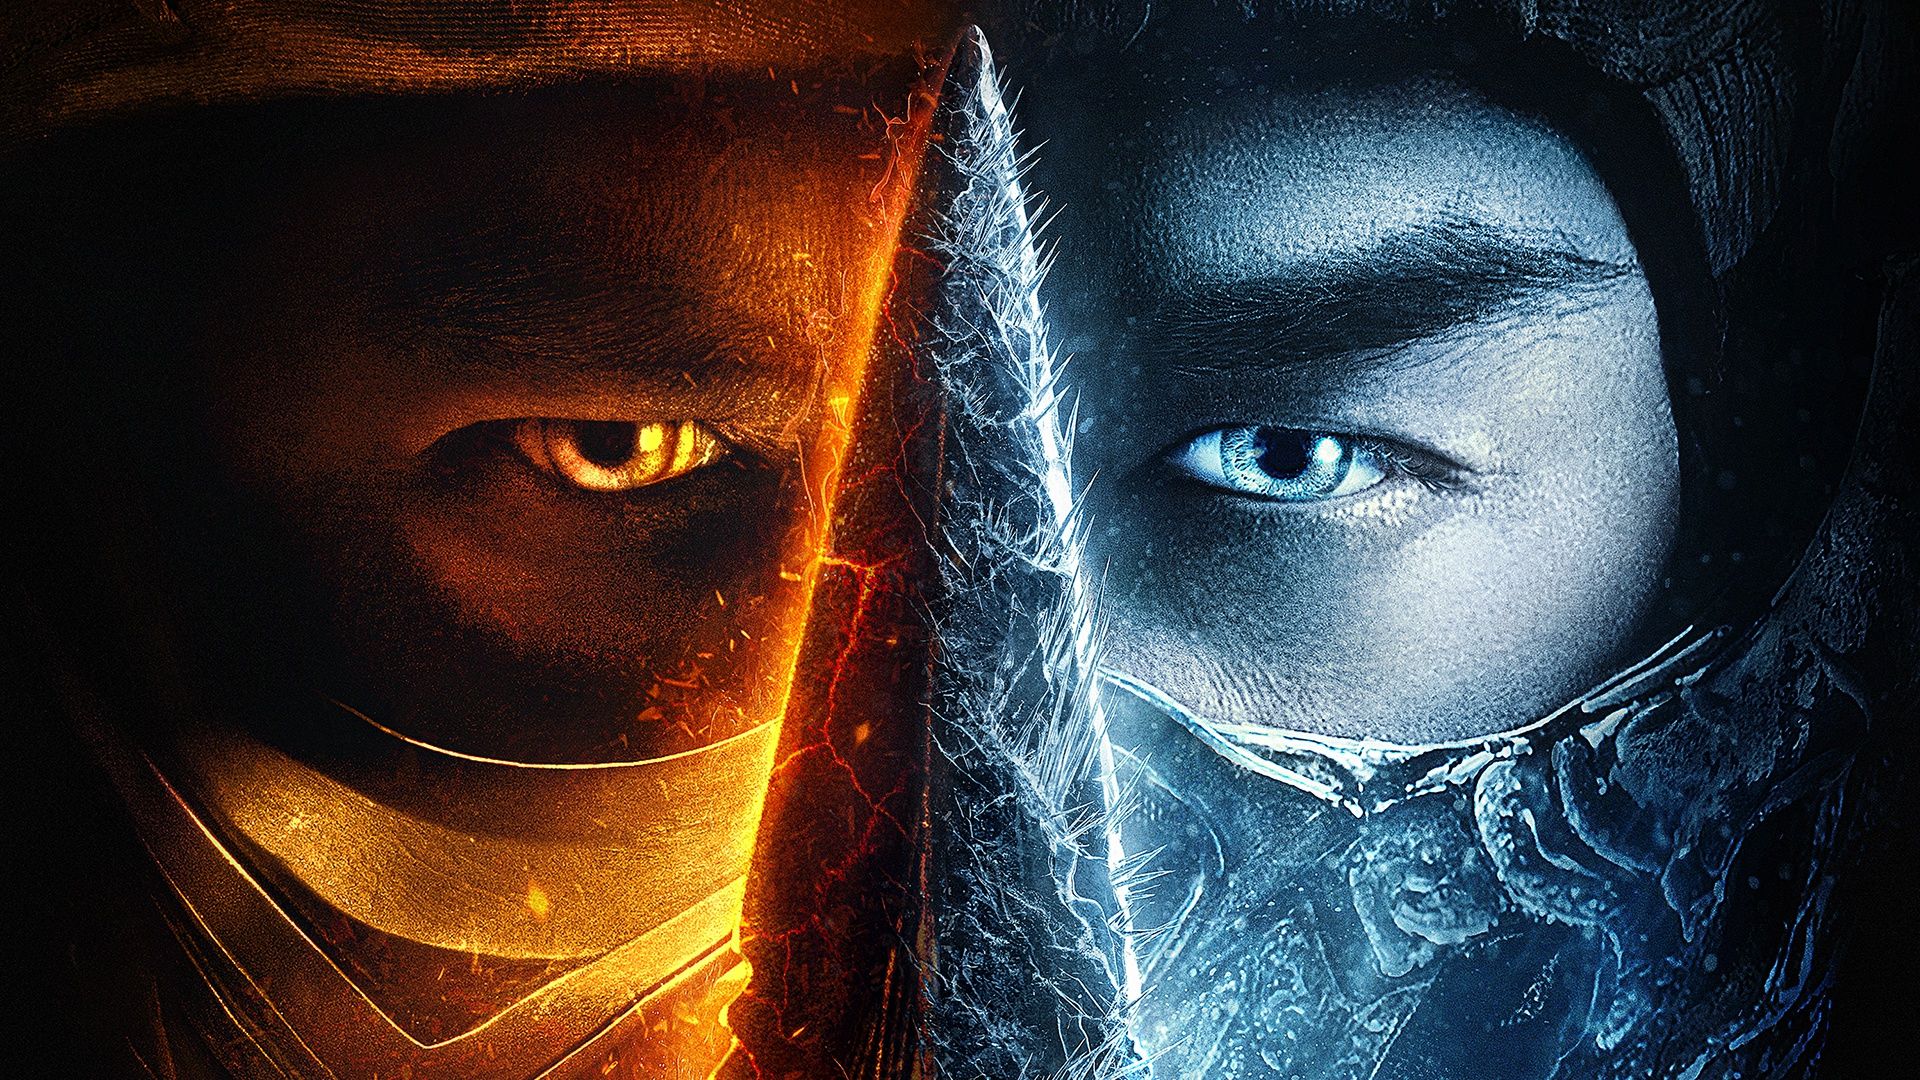 How to watch Mortal Kombat online: see where to stream new movie right now